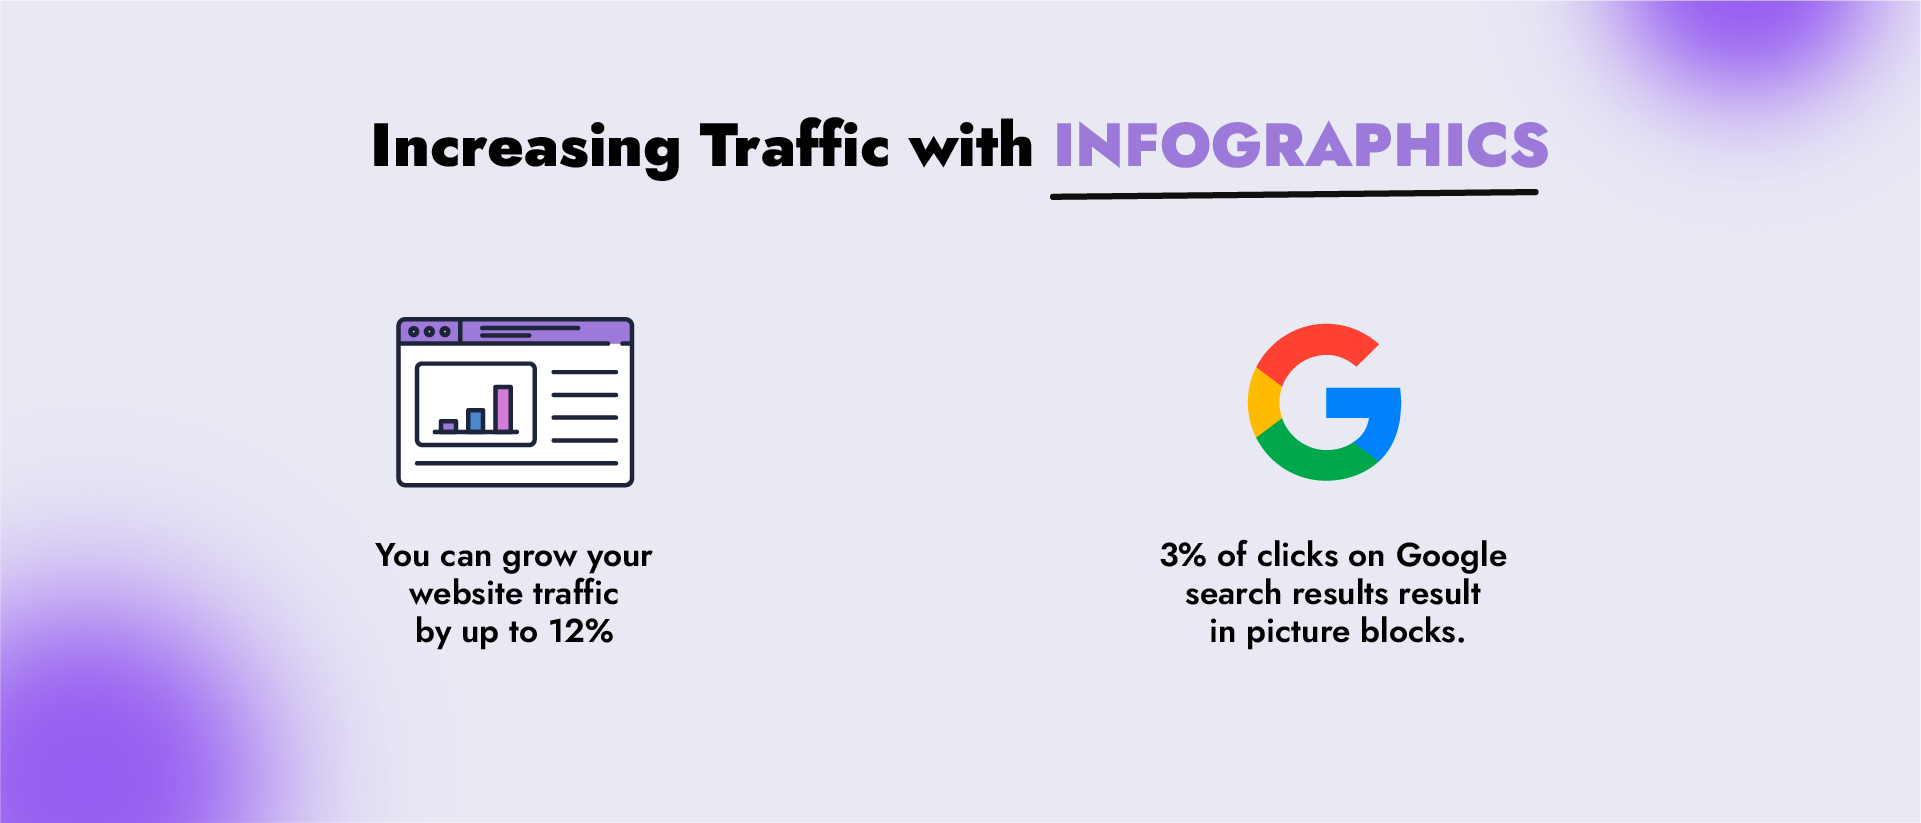 statistics on increasing traffic with infographics